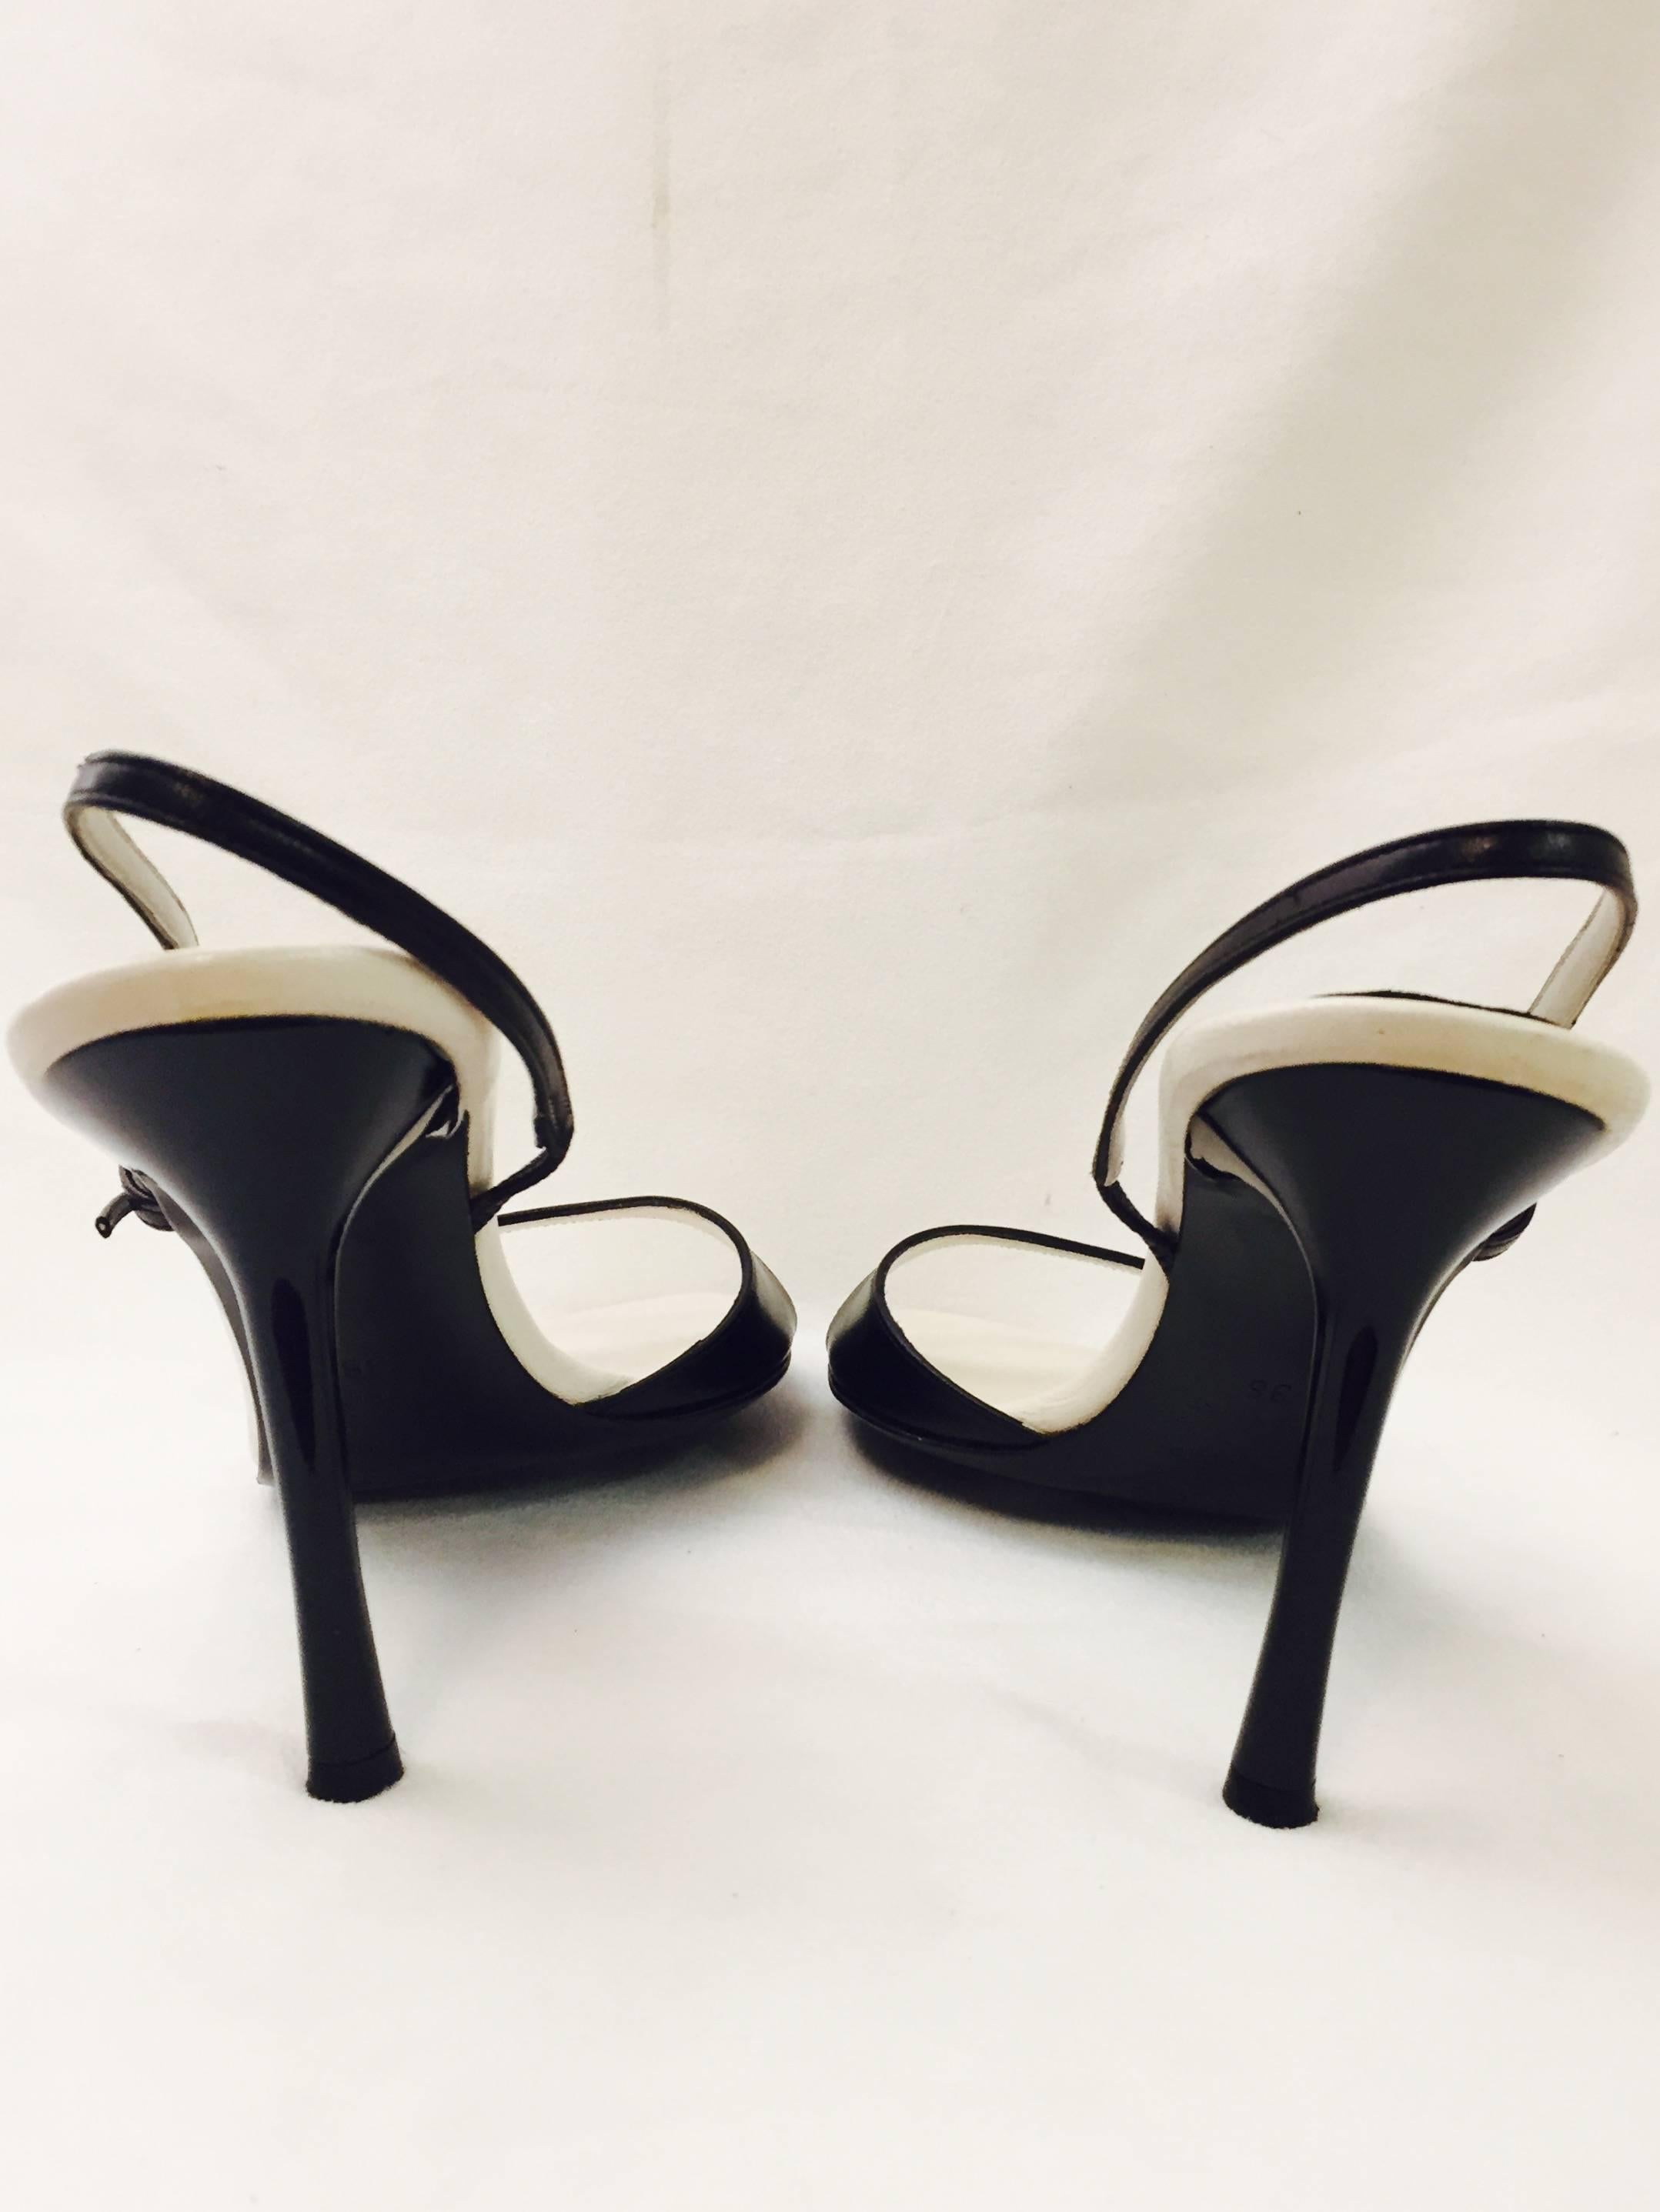 Sensational Sergio Rossi Black Leather High Heel Sandals In Excellent Condition For Sale In Palm Beach, FL